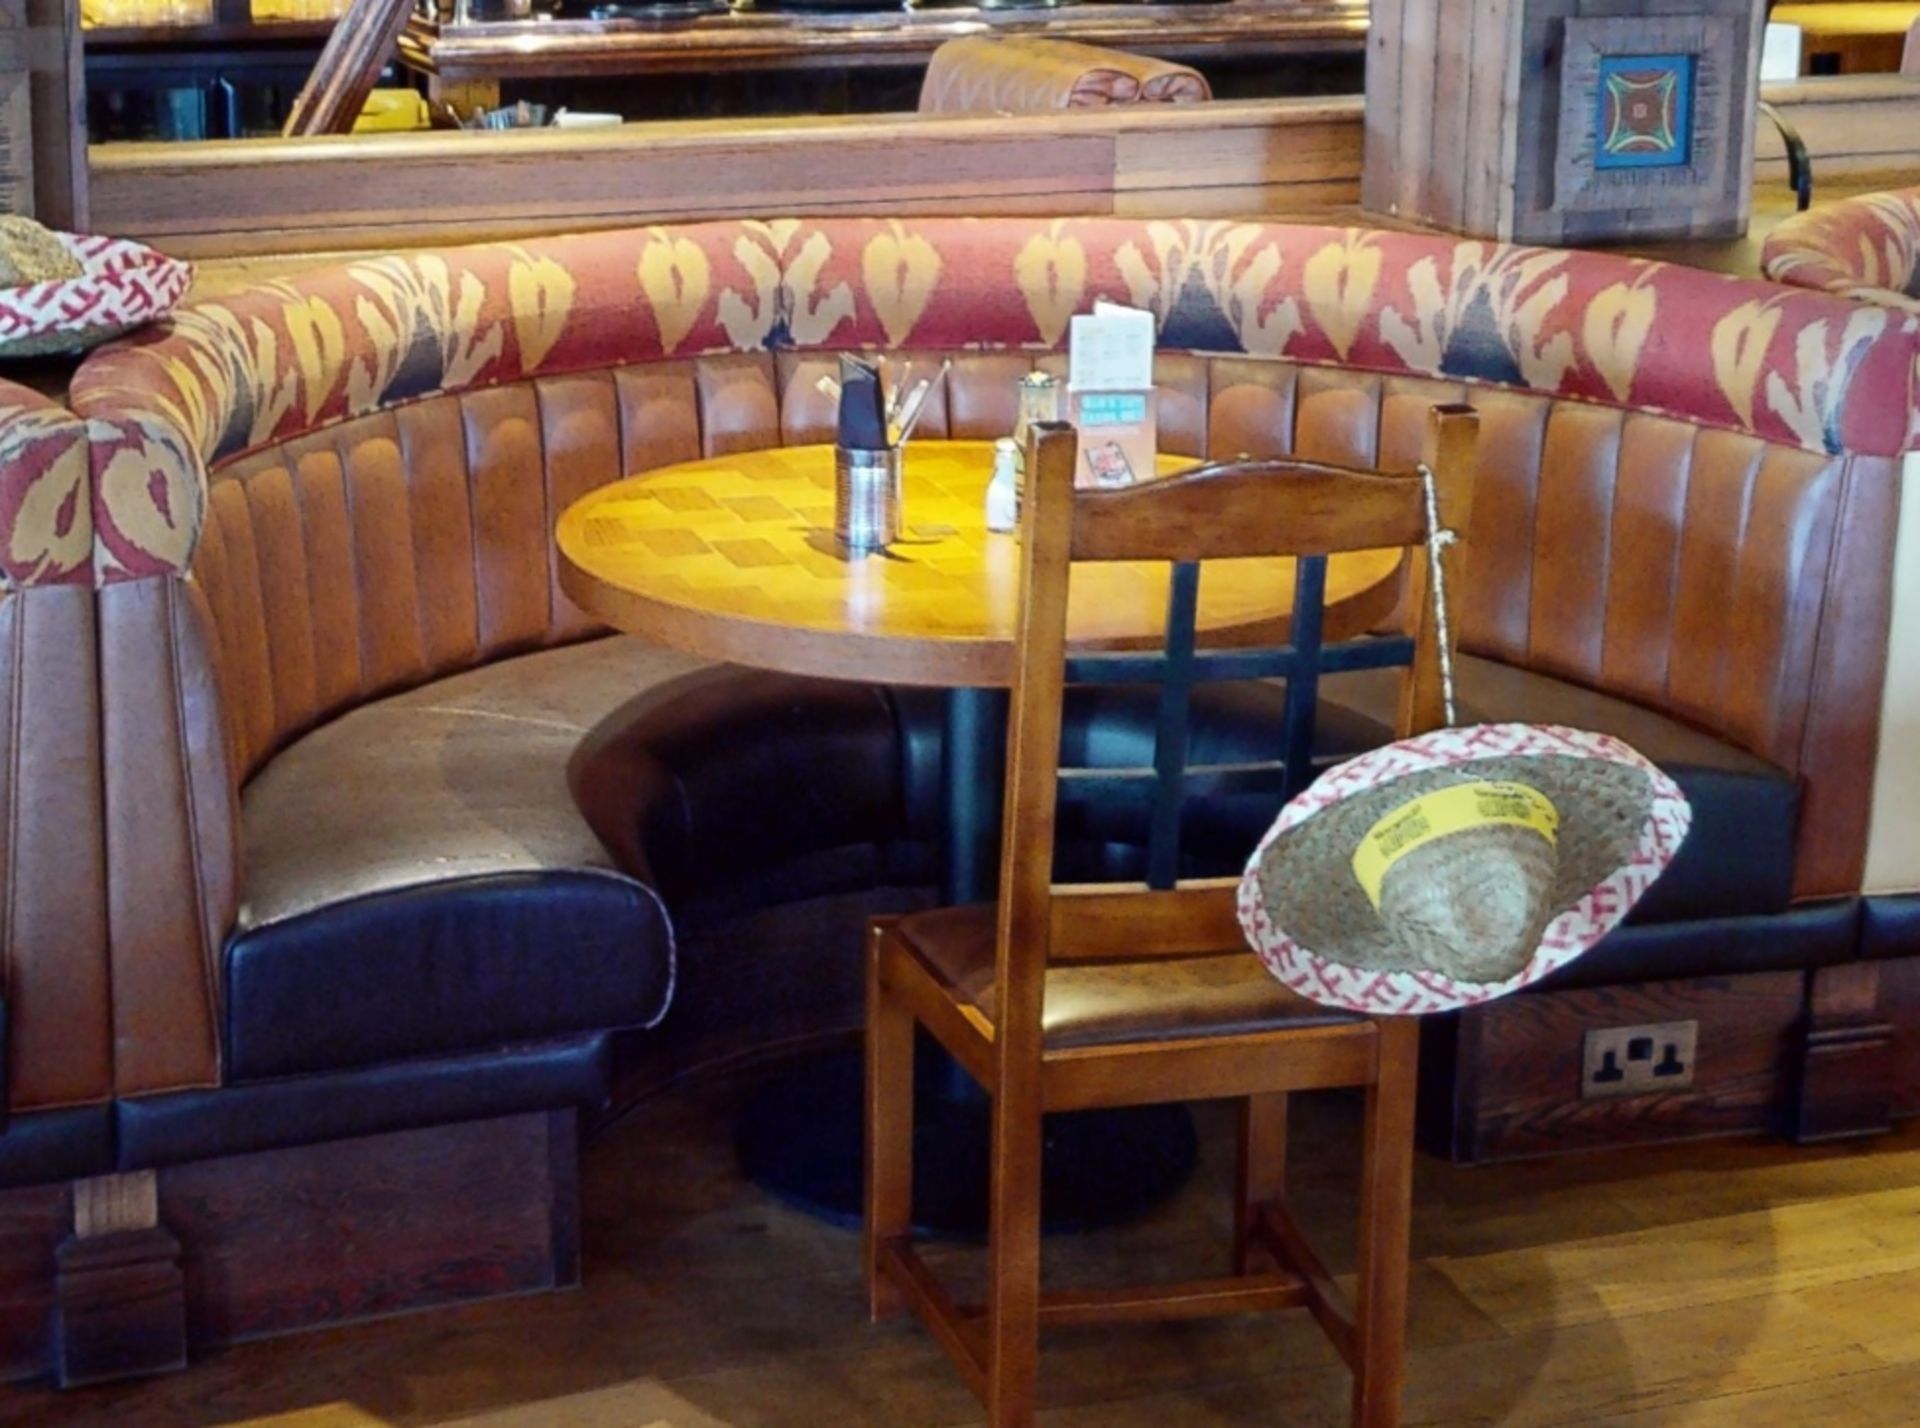 1 x Restaurant C Shape Seating Booth - Features Brown Faux Leather Seat Pads and Light Brown - Image 2 of 2